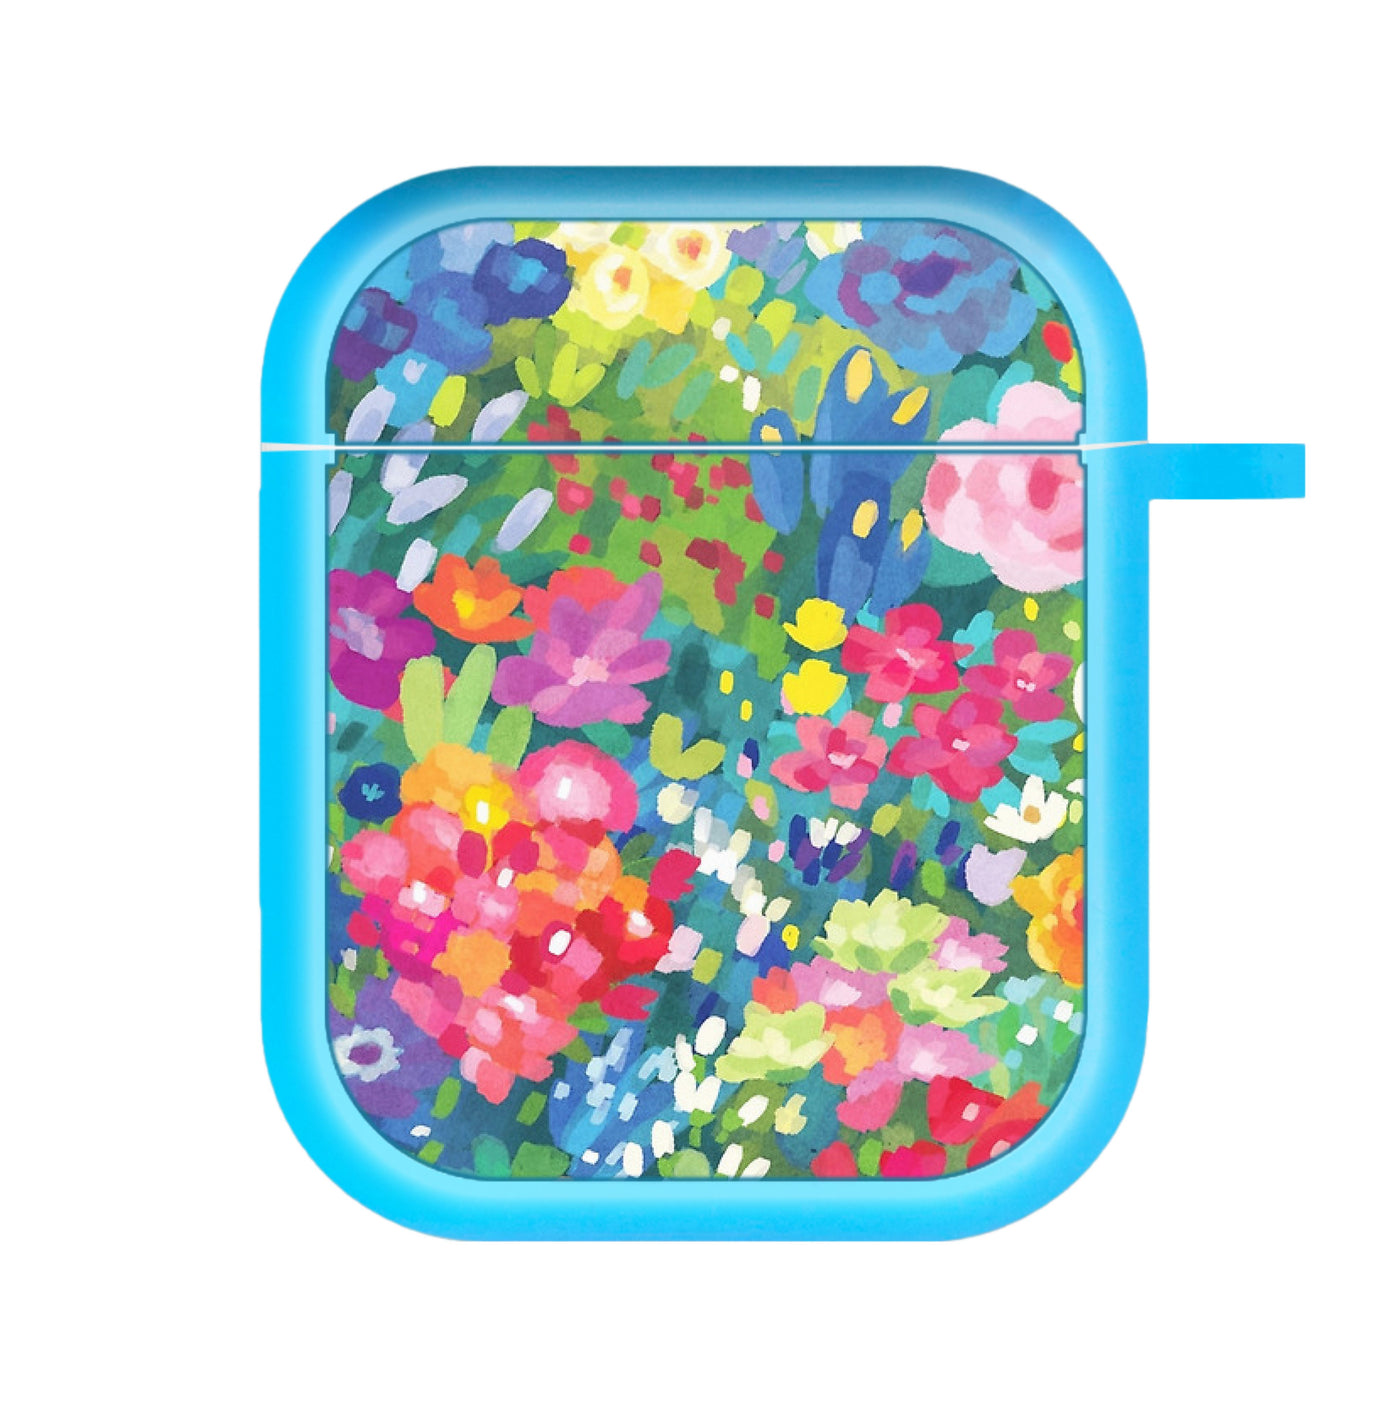 Colourful Floral Pattern AirPods Case